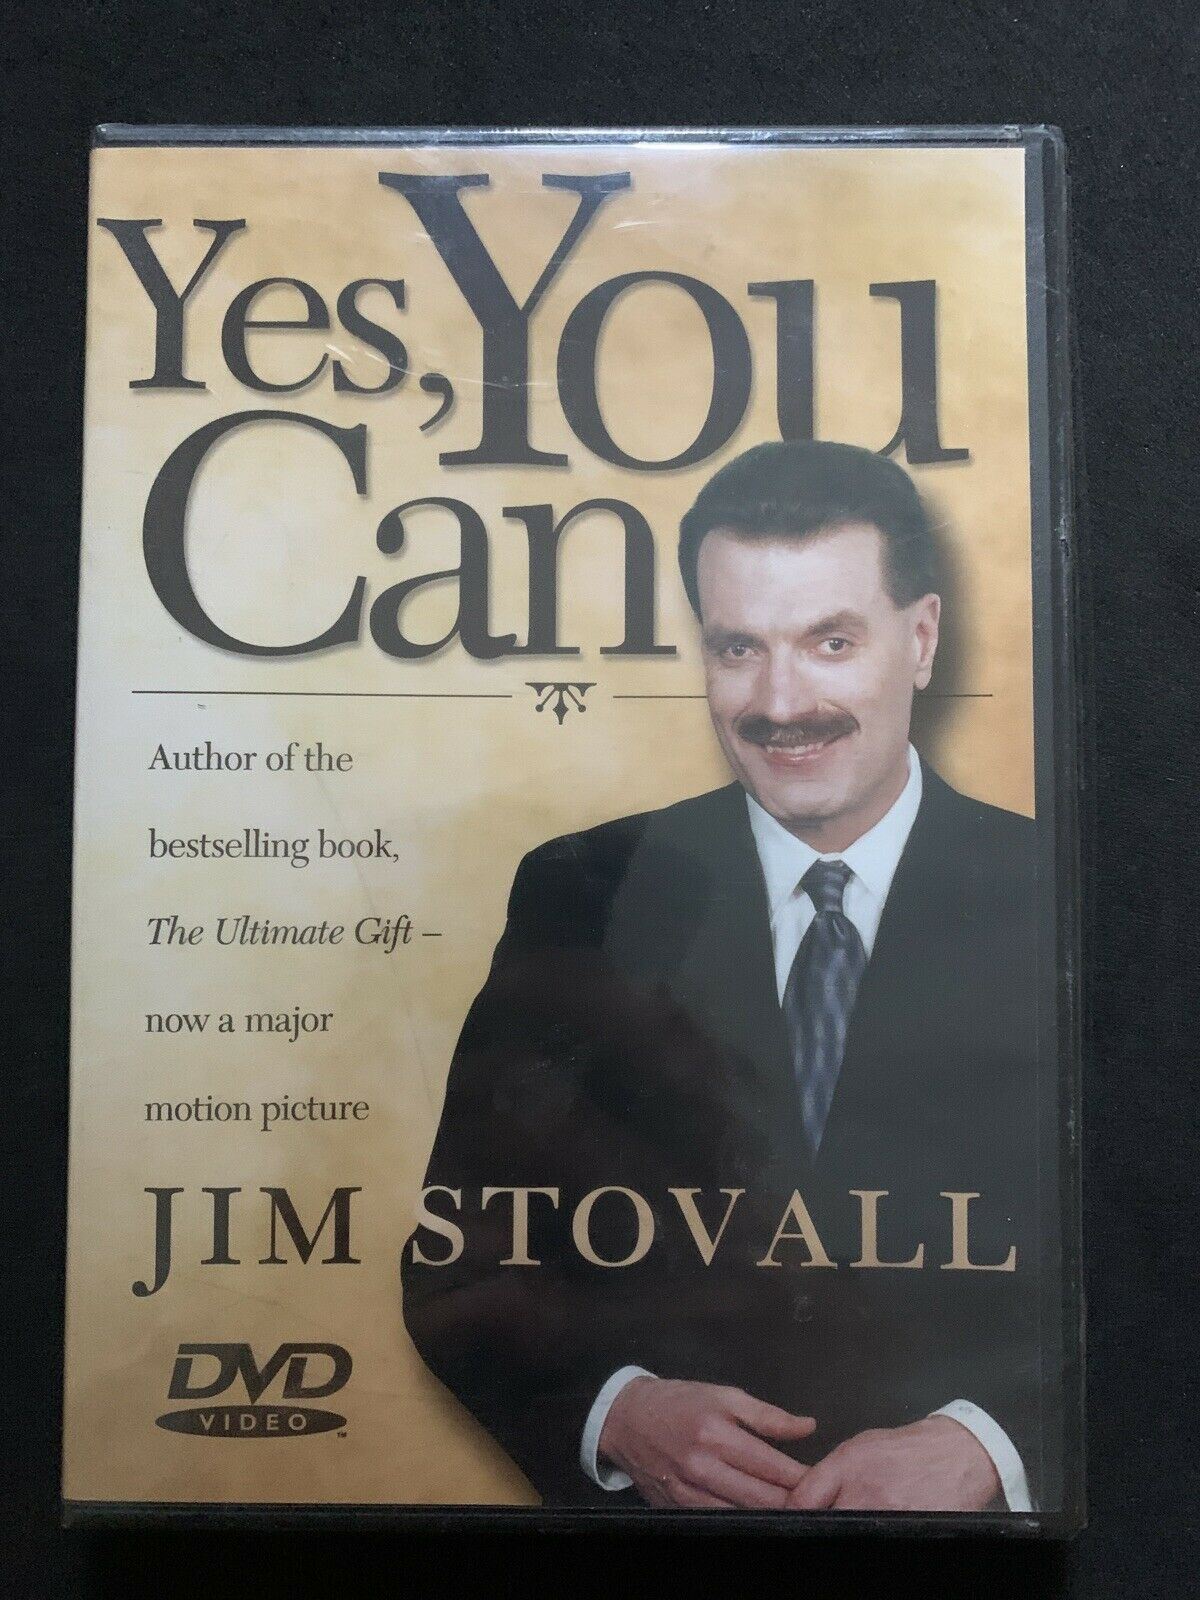 *New Sealed* Yes, You You Can - Jim Stovall DVD